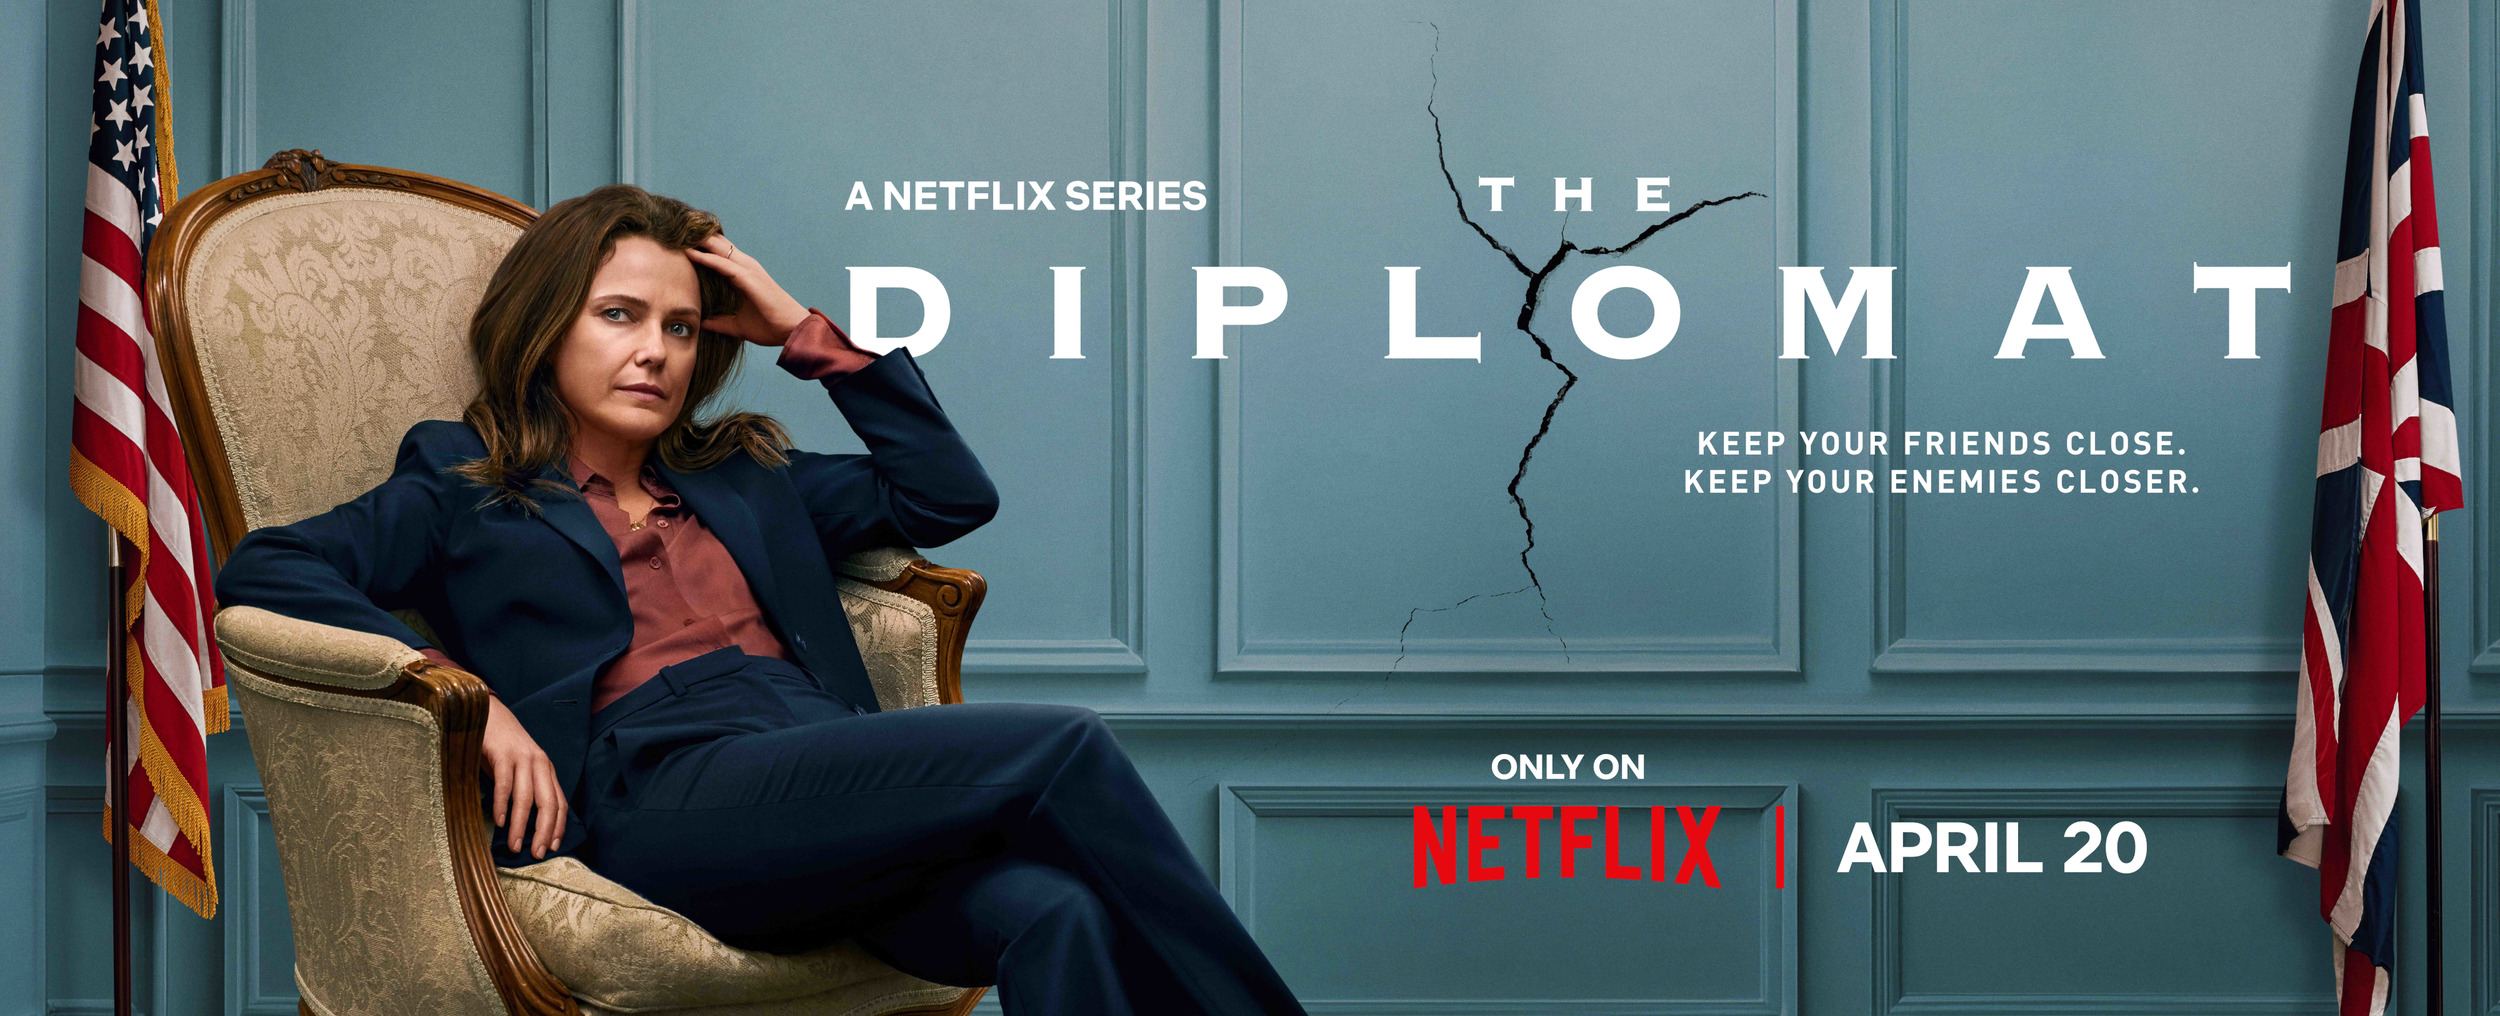 Mega Sized TV Poster Image for The Diplomat (#2 of 2)